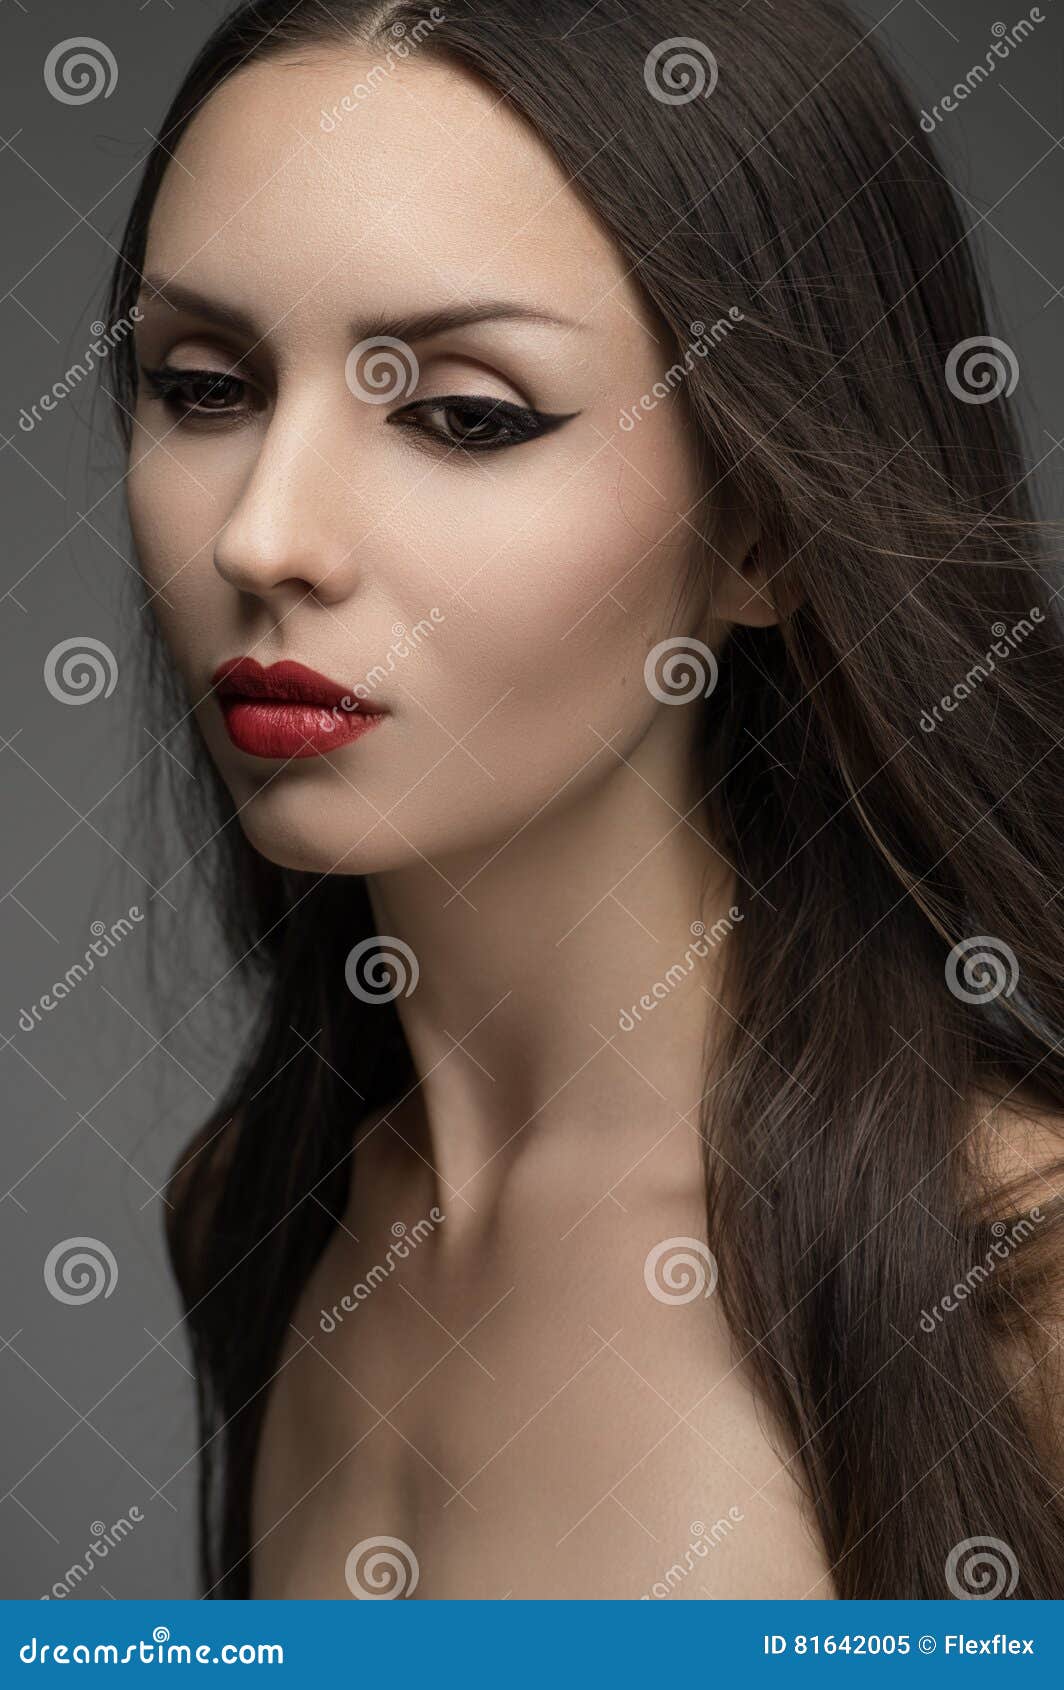 woman with red lips in studio